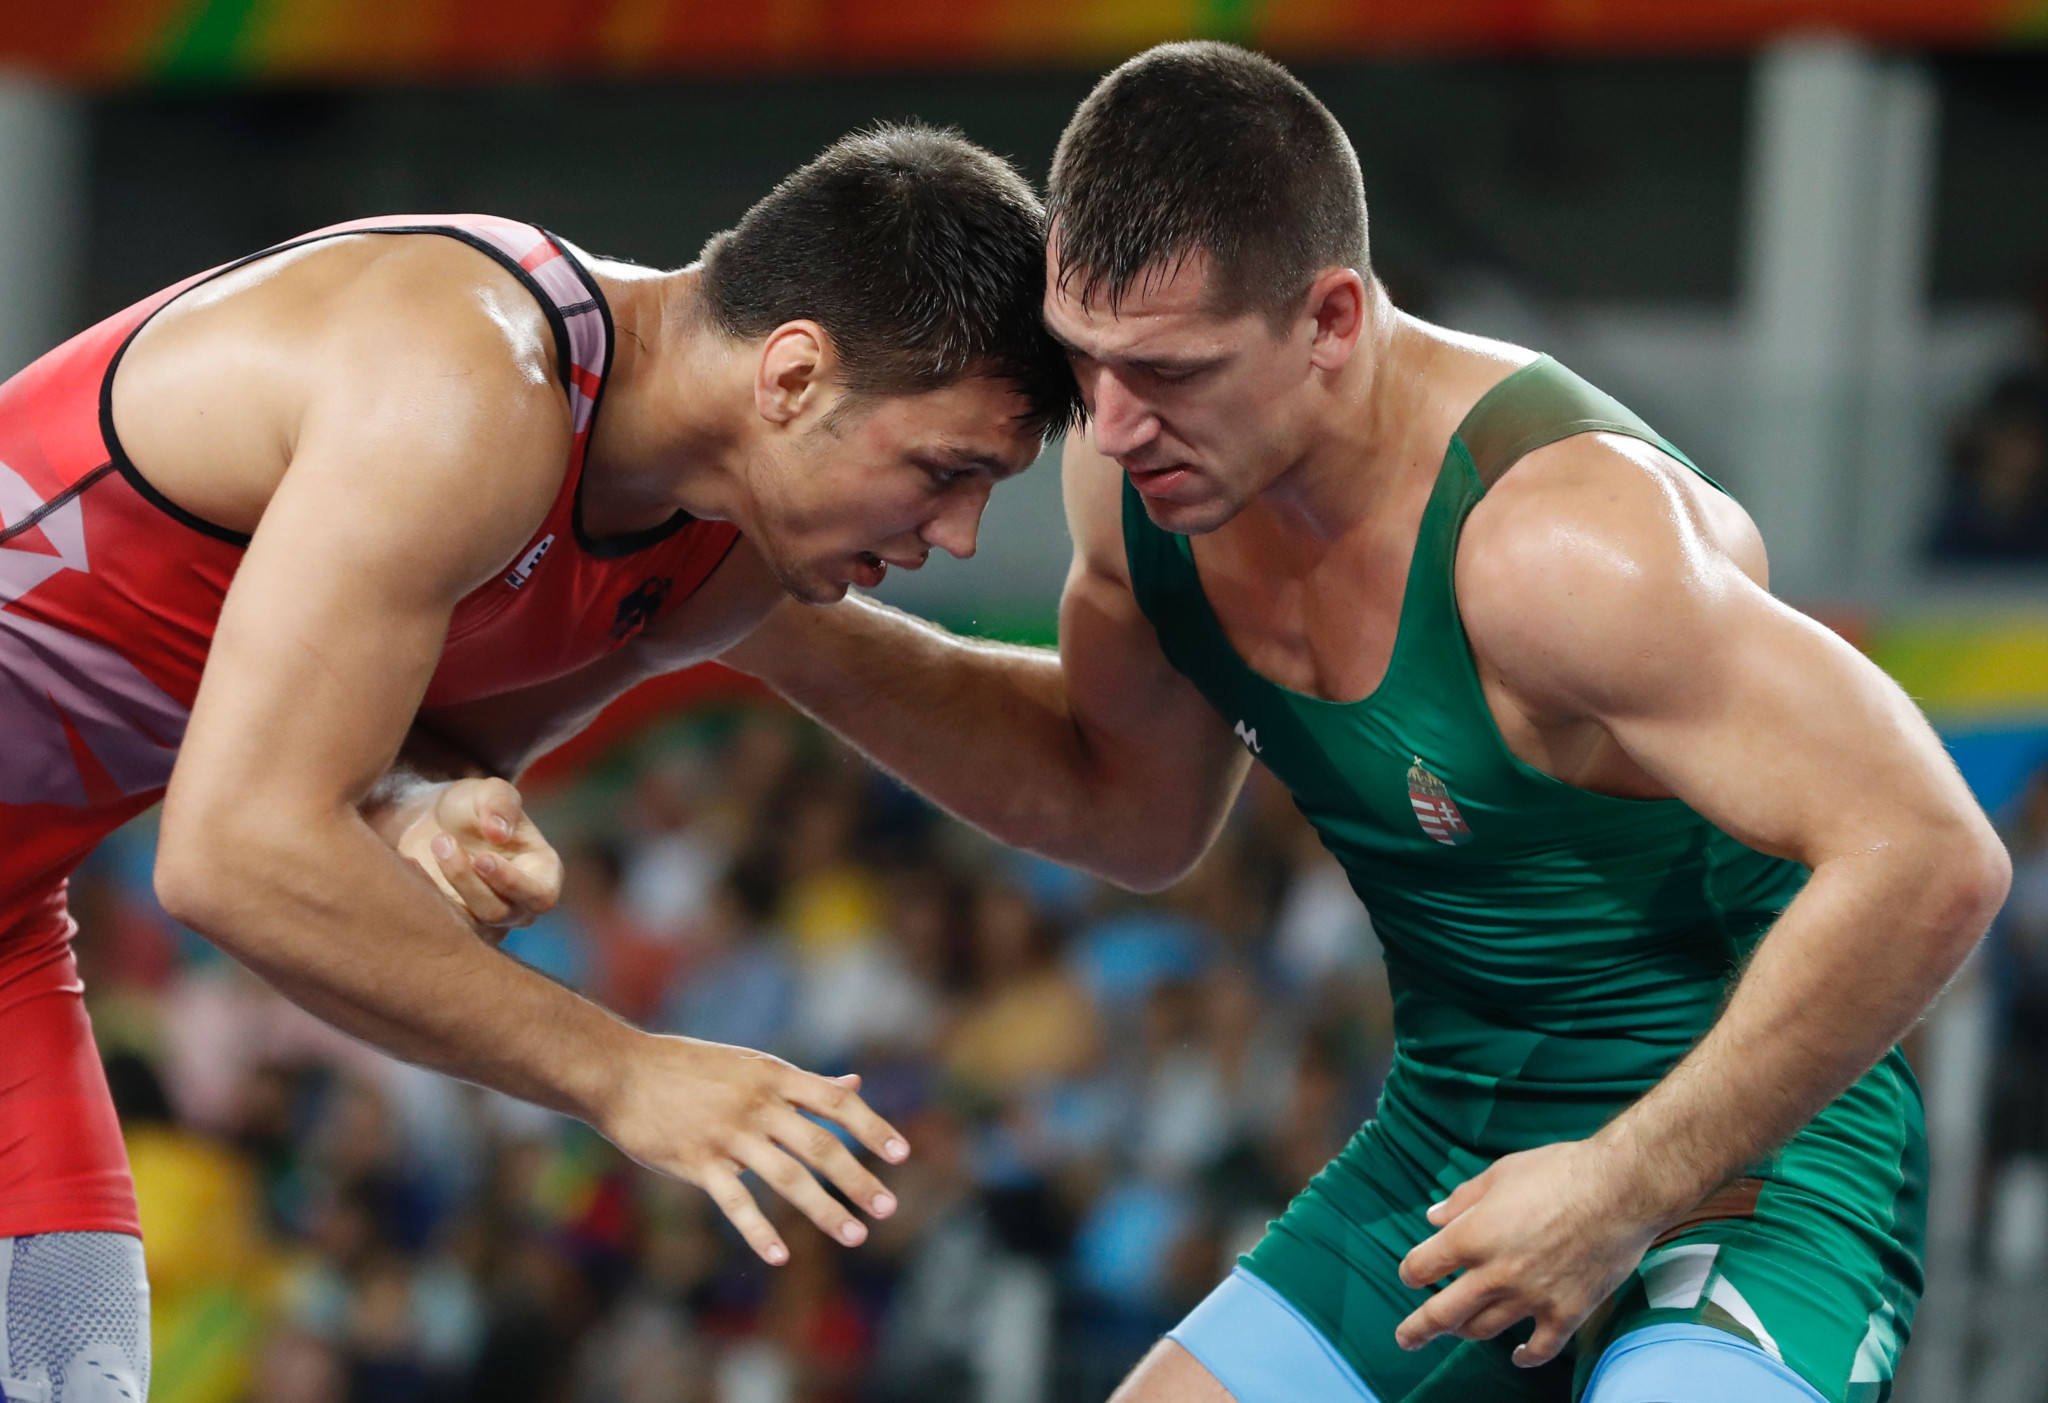 Viktor Lorincz, in green, won the 87kg Greco-Roman final ©Getty Images